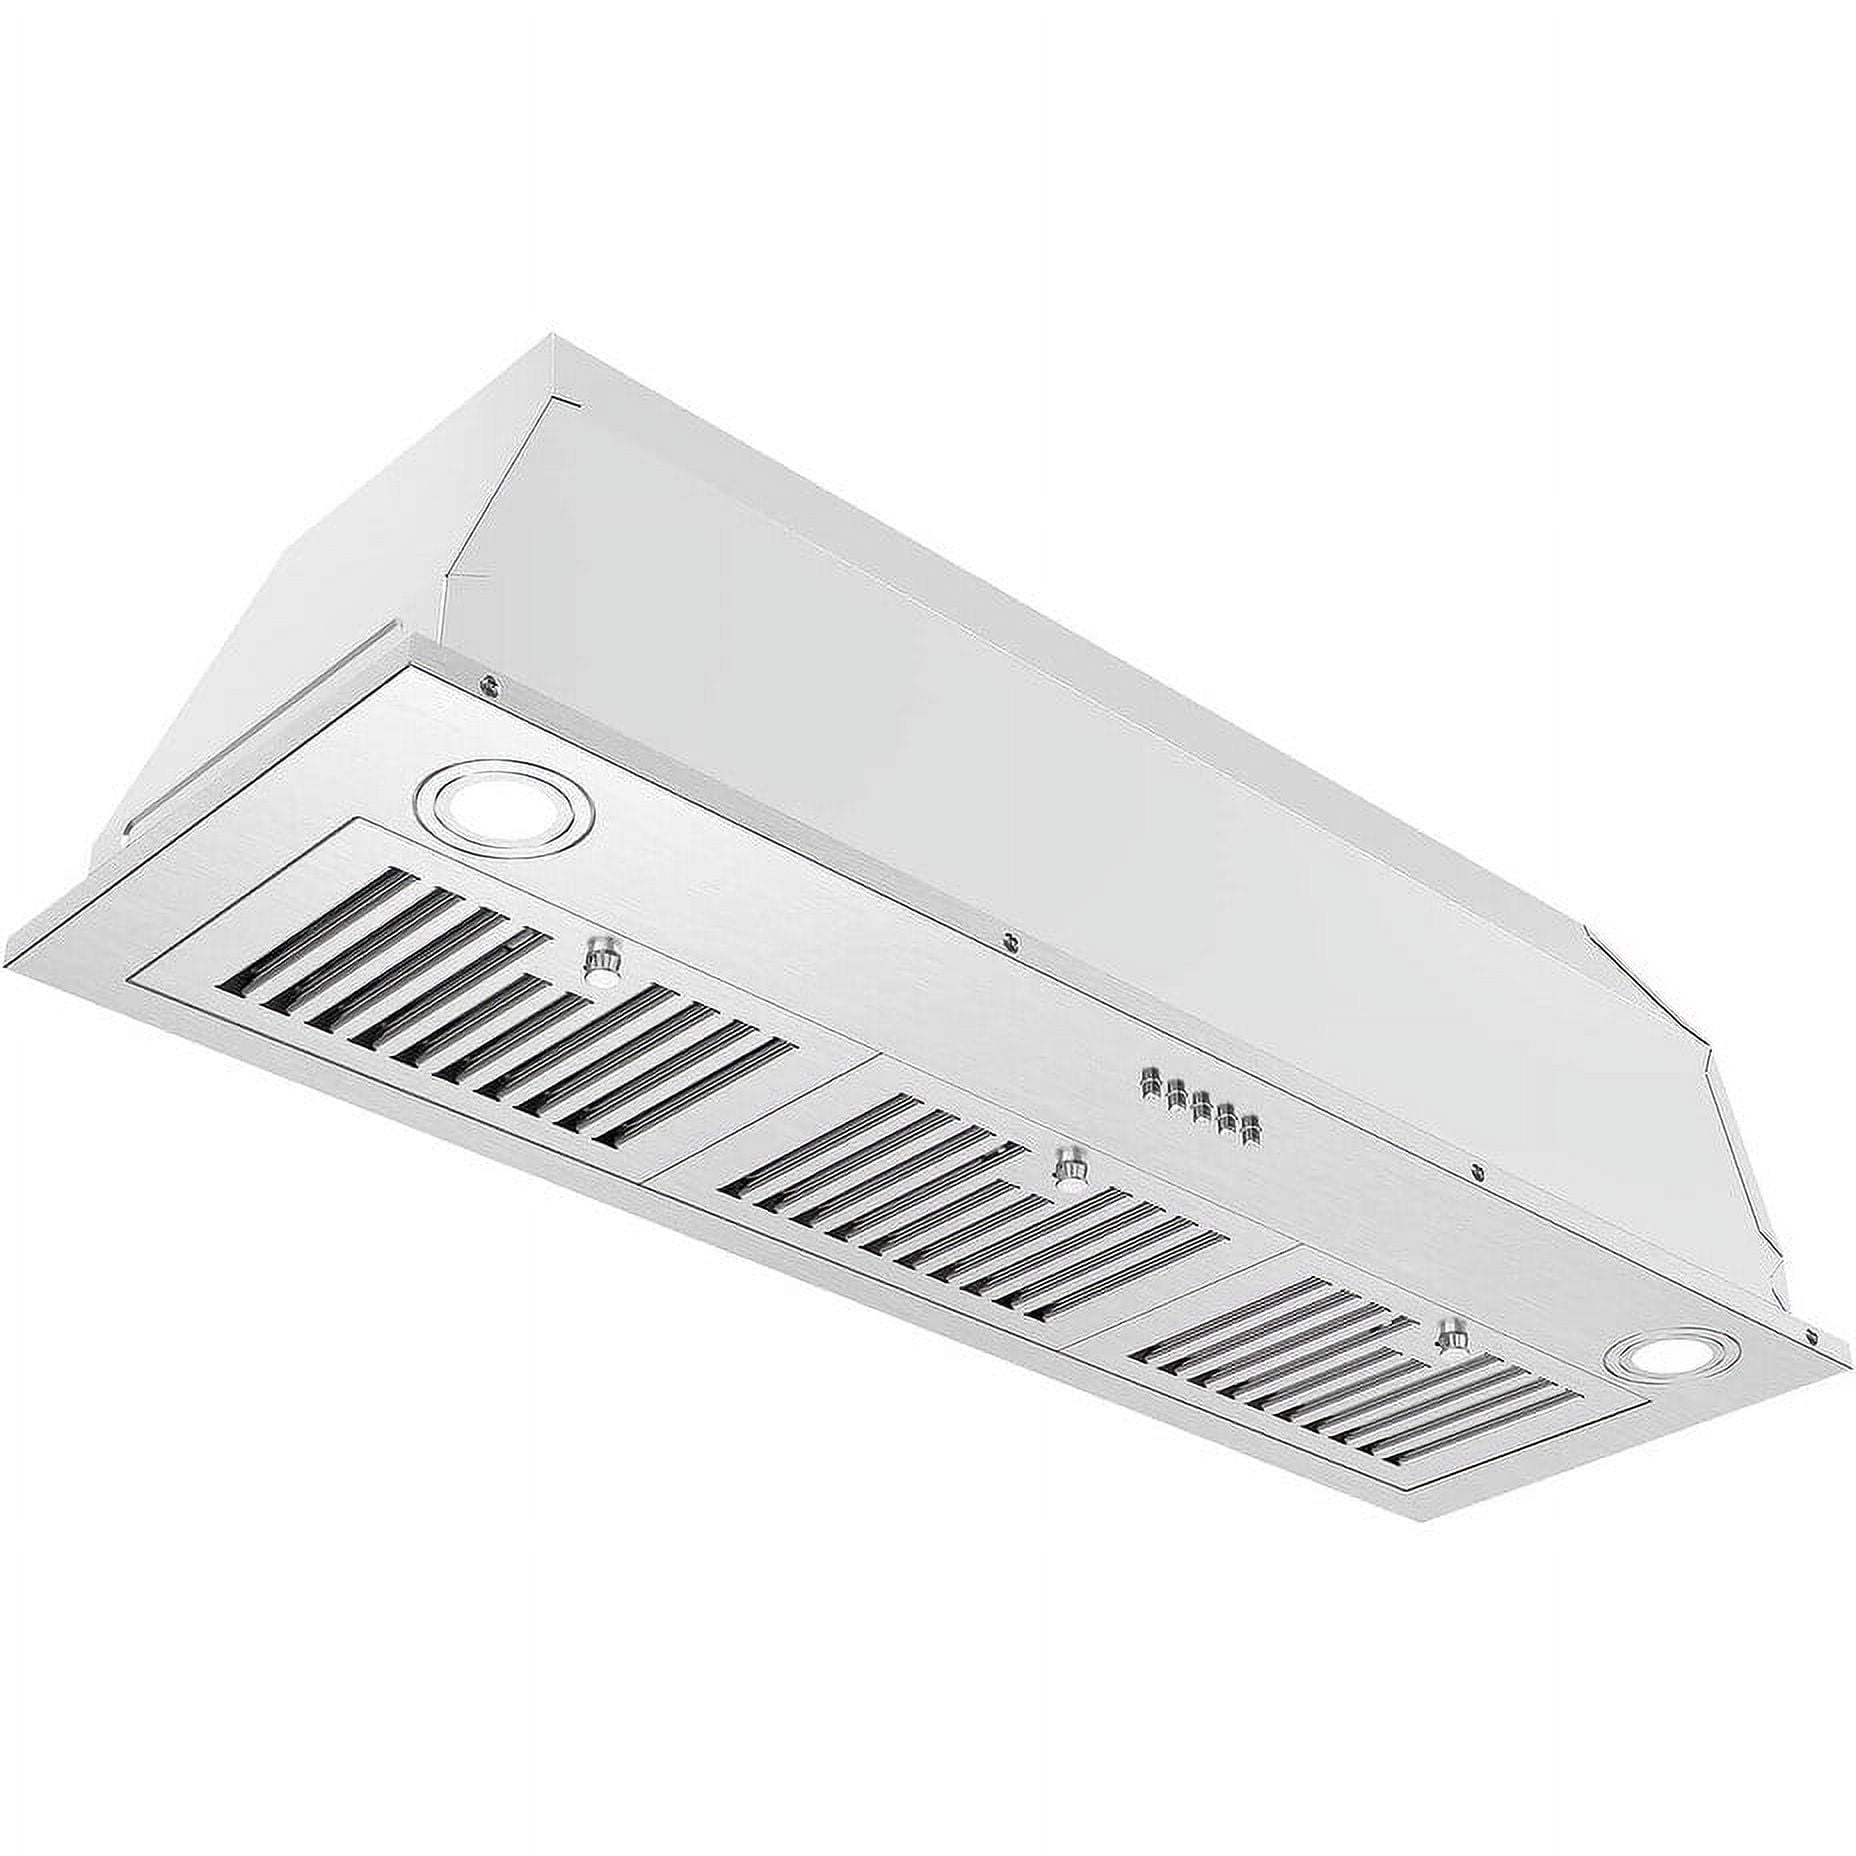 Range Hood Insert/Built-in 30-36 inch, 6'' Duct 3-Speeds 600 CFM Stainless Steel Vent Hood with LED Lights - 30inch - Cool White